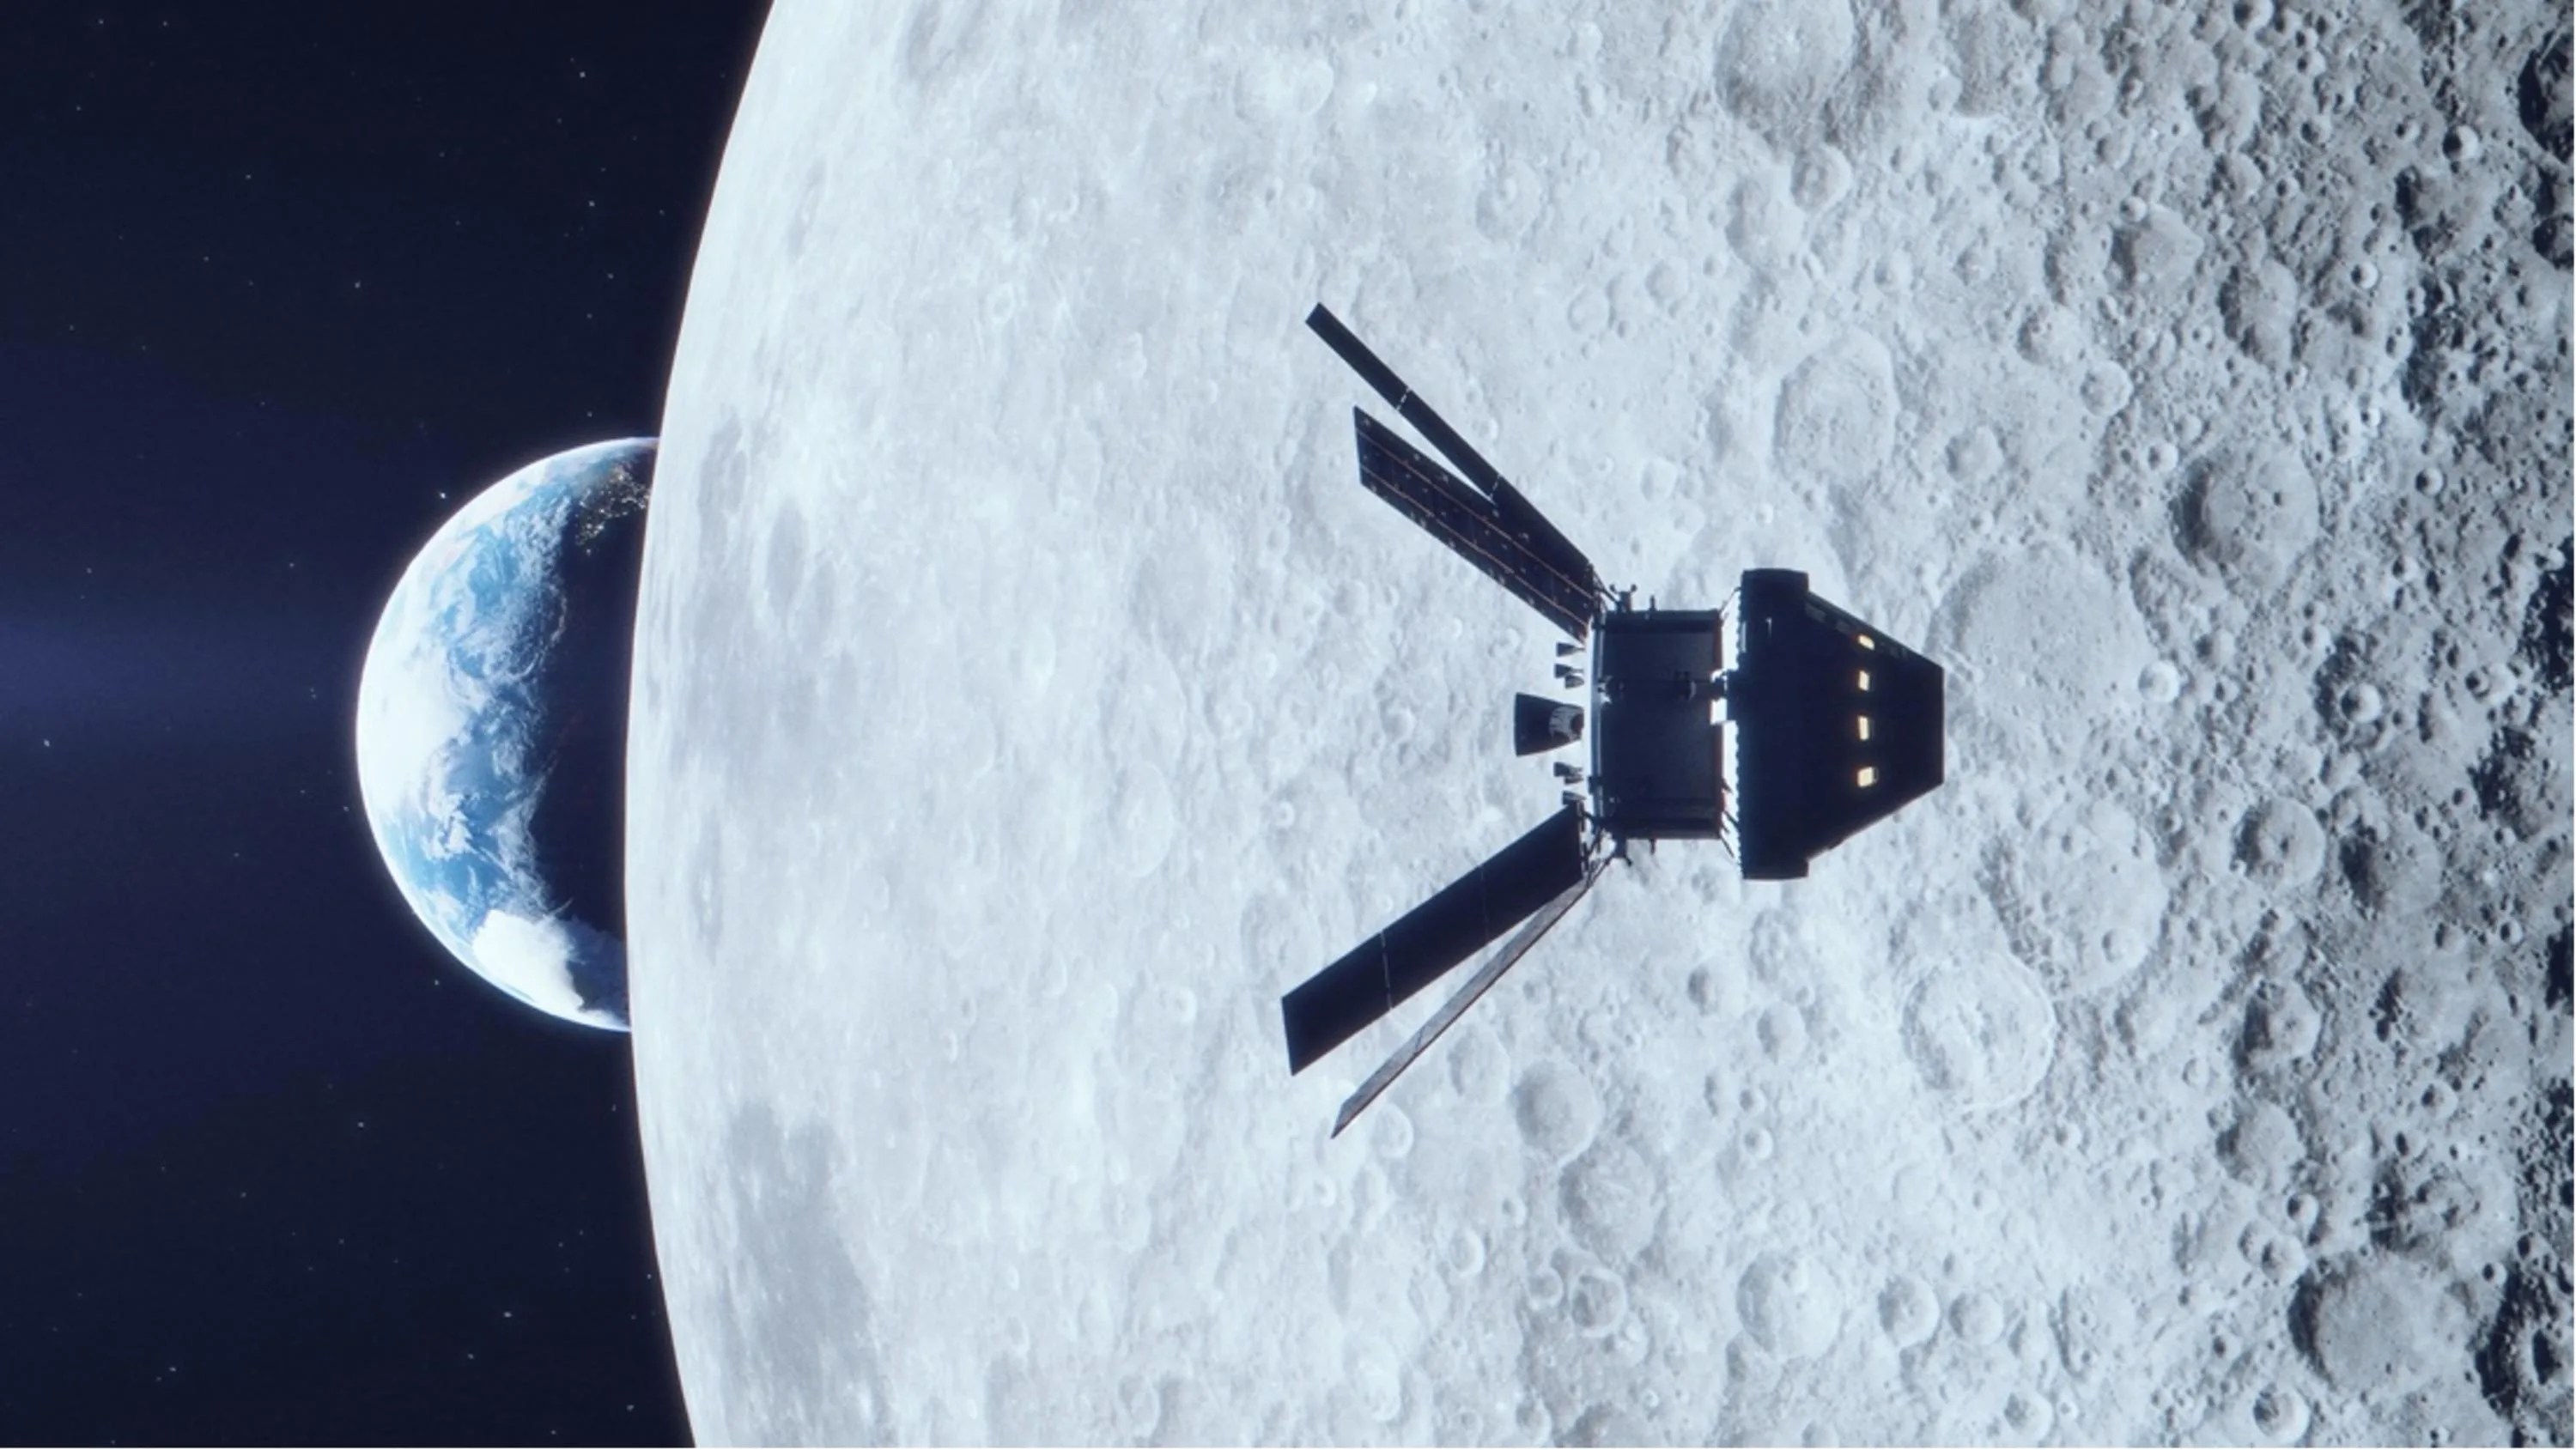 In the foreground, is capsule orbiting around the cratered surface of the Moon with half of Earth appearing behind.